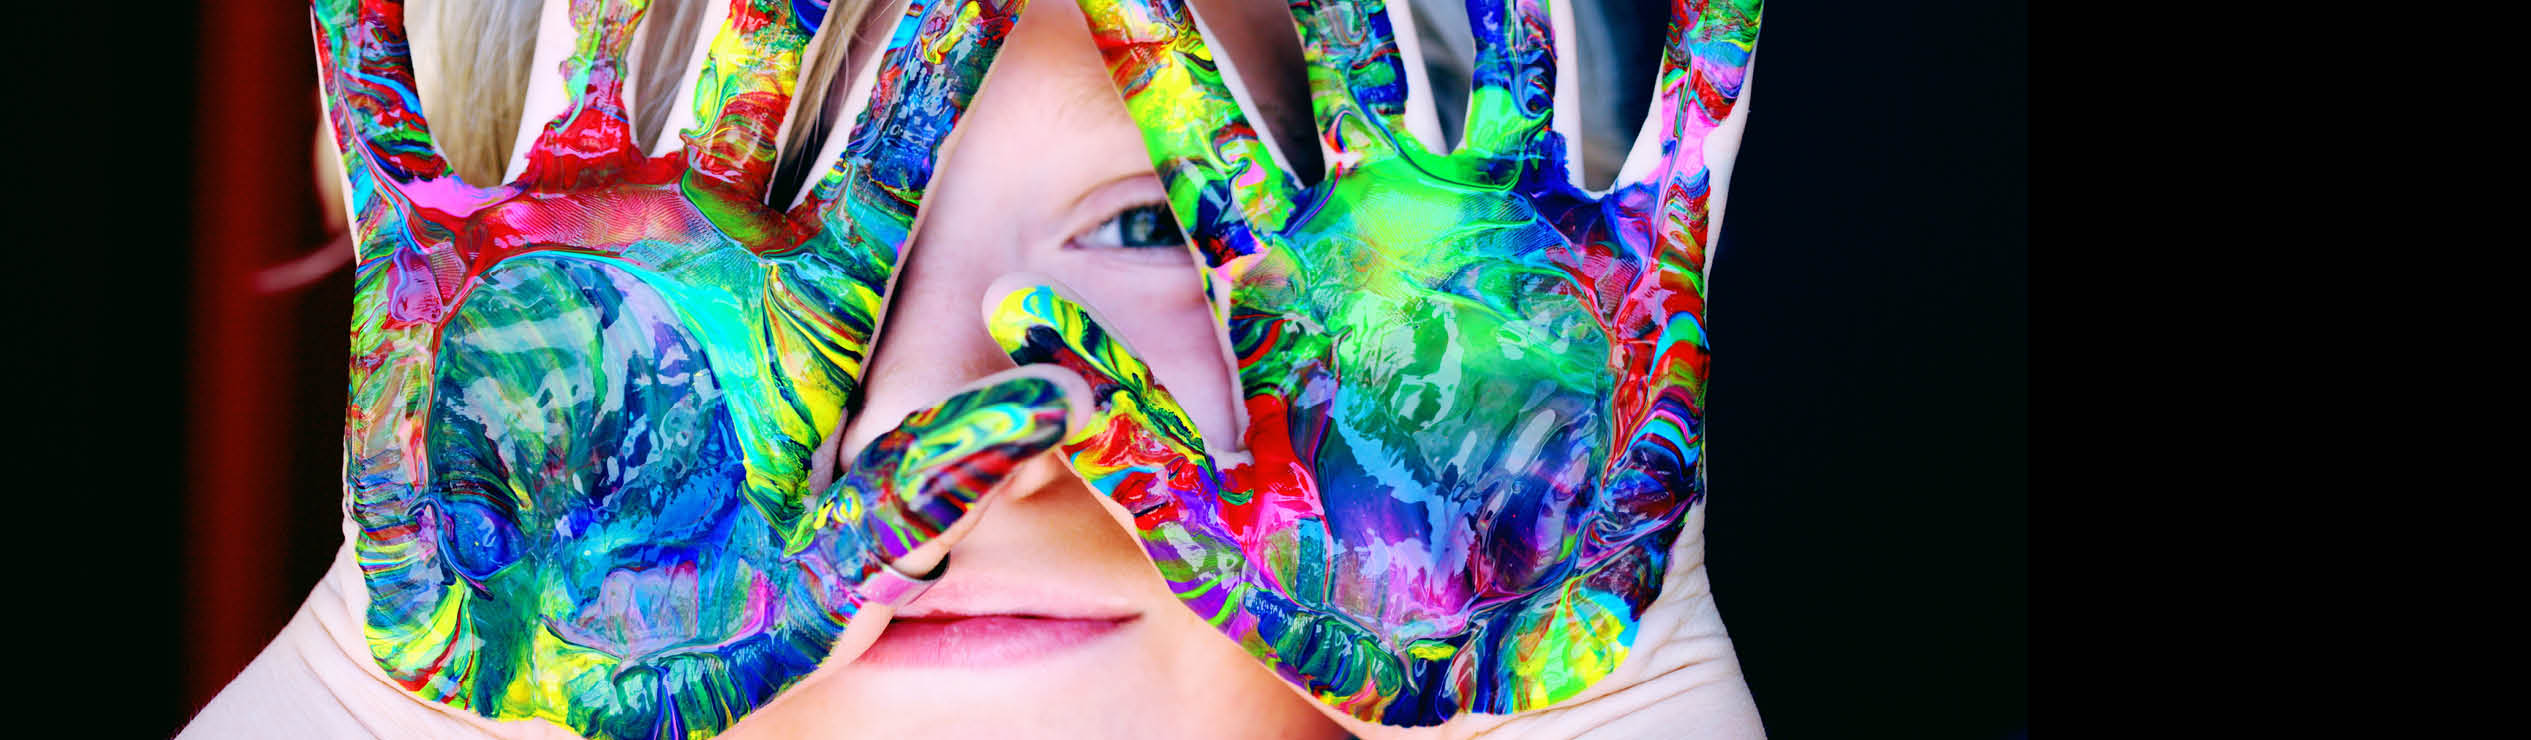 An image of a child's painted hand